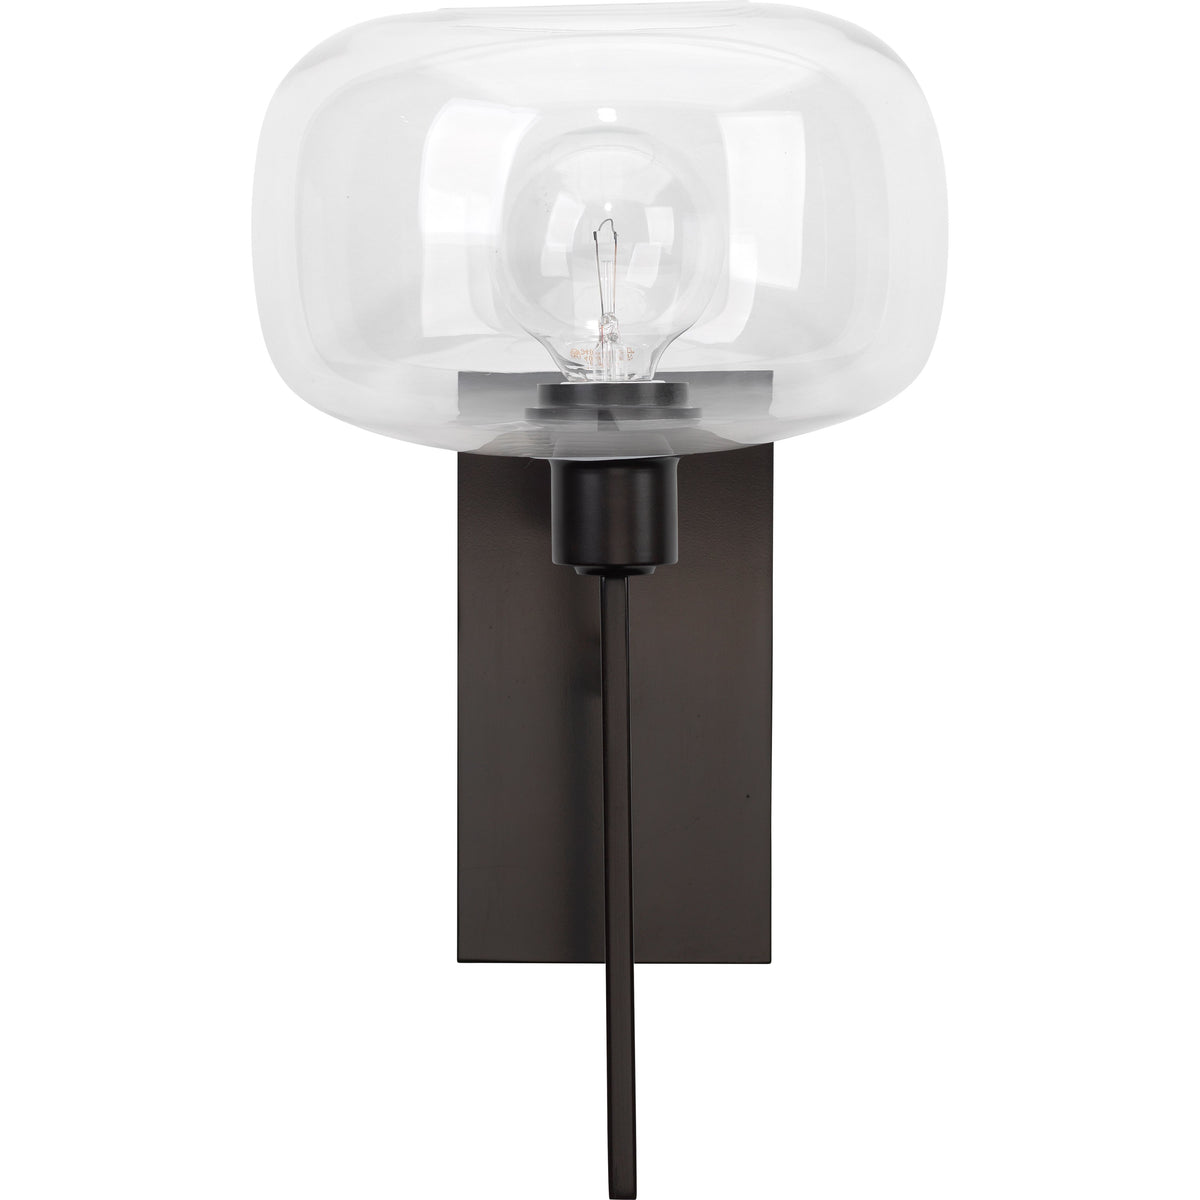 Jamie Young Company - 4SCAN-SCOB - Scando Wall Sconce - Scando - Oil Rubbed Bronze, Clear Glass